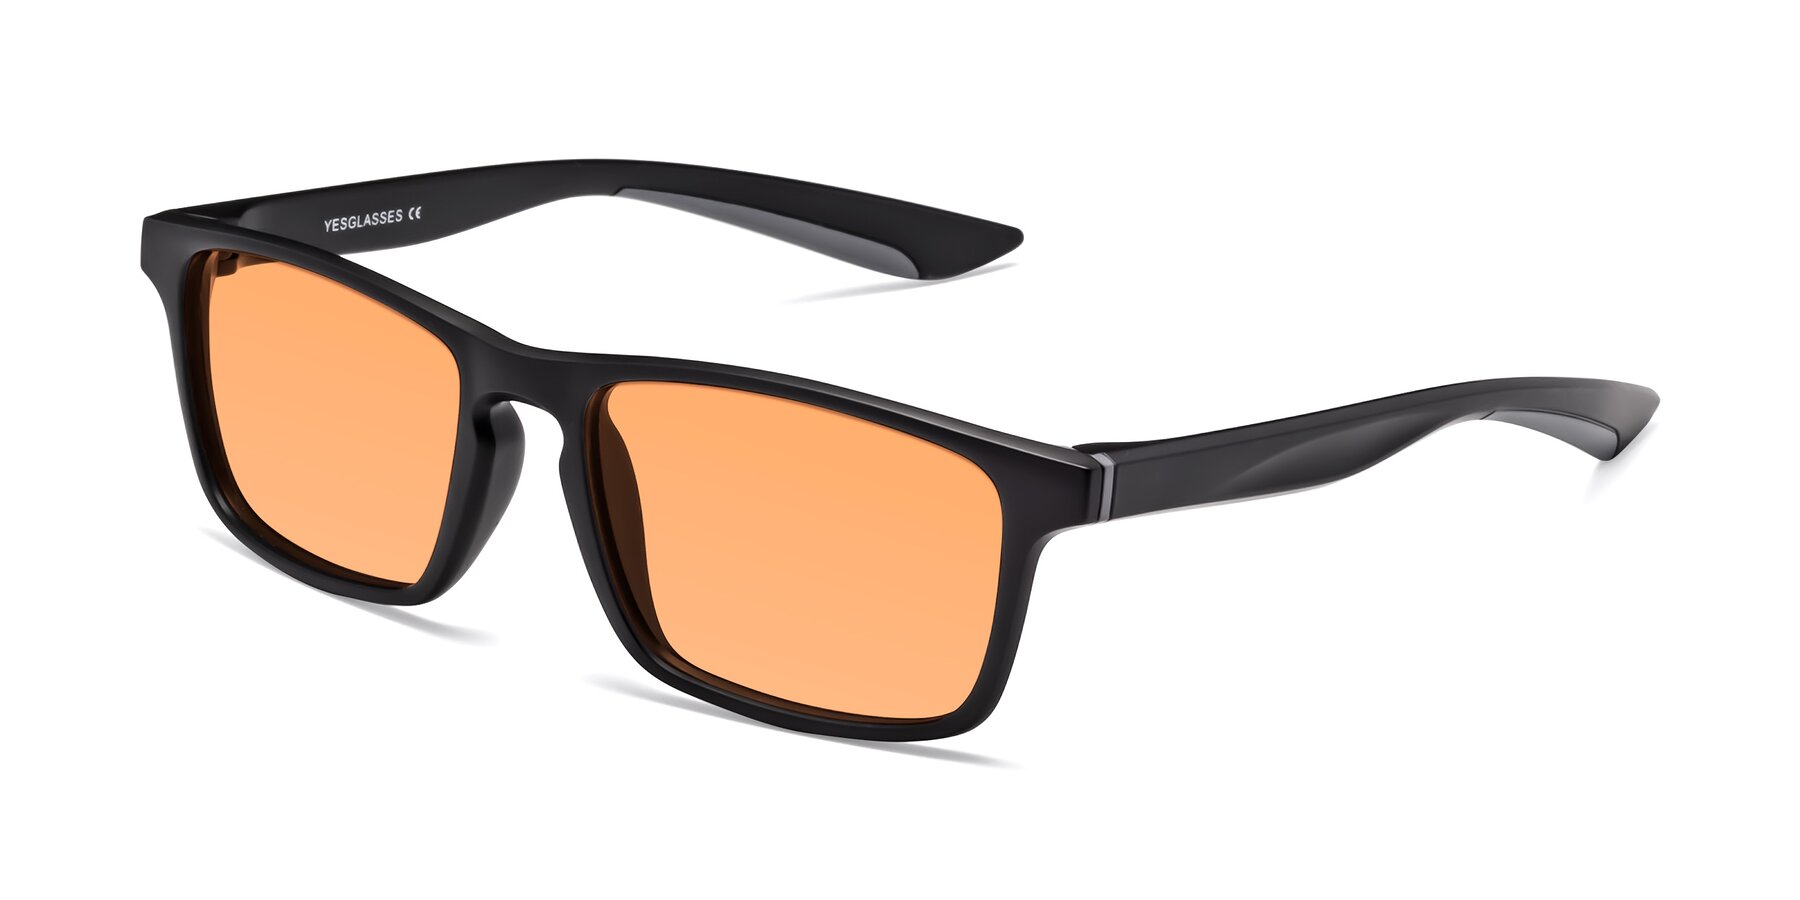 Angle of Passion in Matte Black-Gray with Medium Orange Tinted Lenses